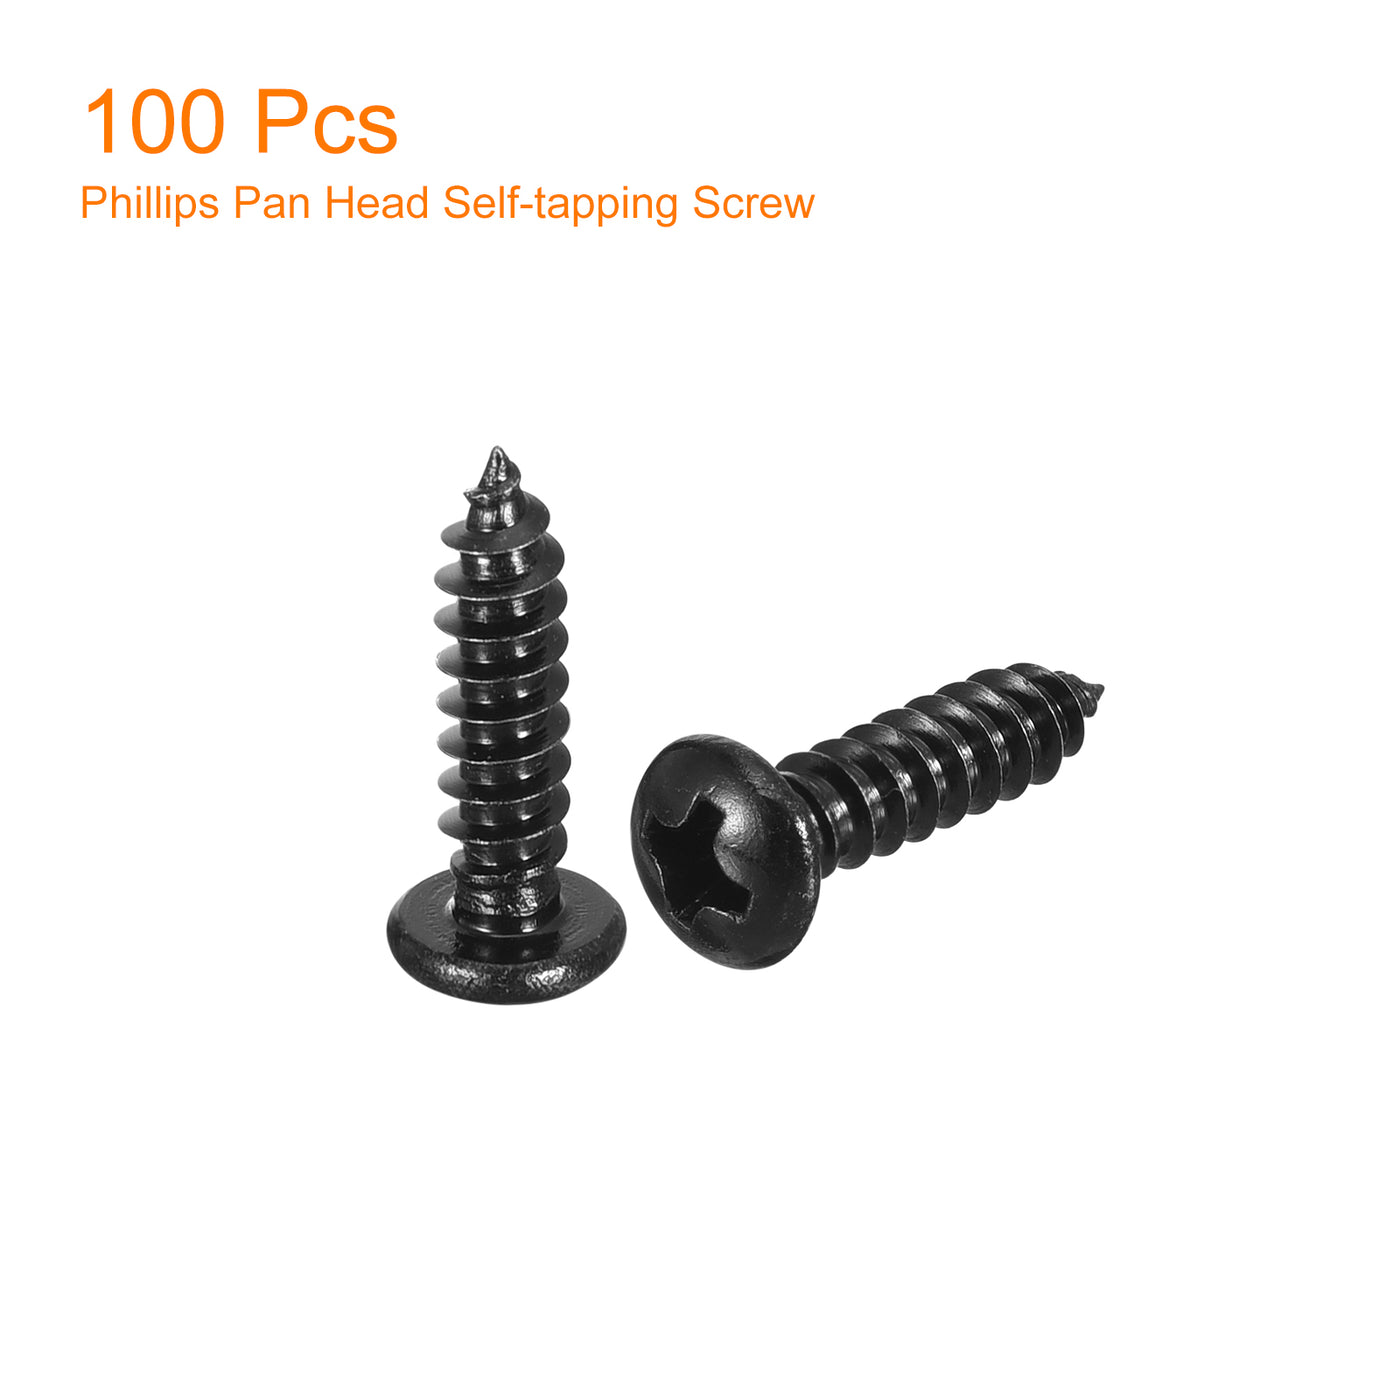 uxcell Uxcell #8 x 5/8" Phillips Pan Head Self-tapping Screw, 100pcs - 304 Stainless Steel Round Head Wood Screw Full Thread (Black)